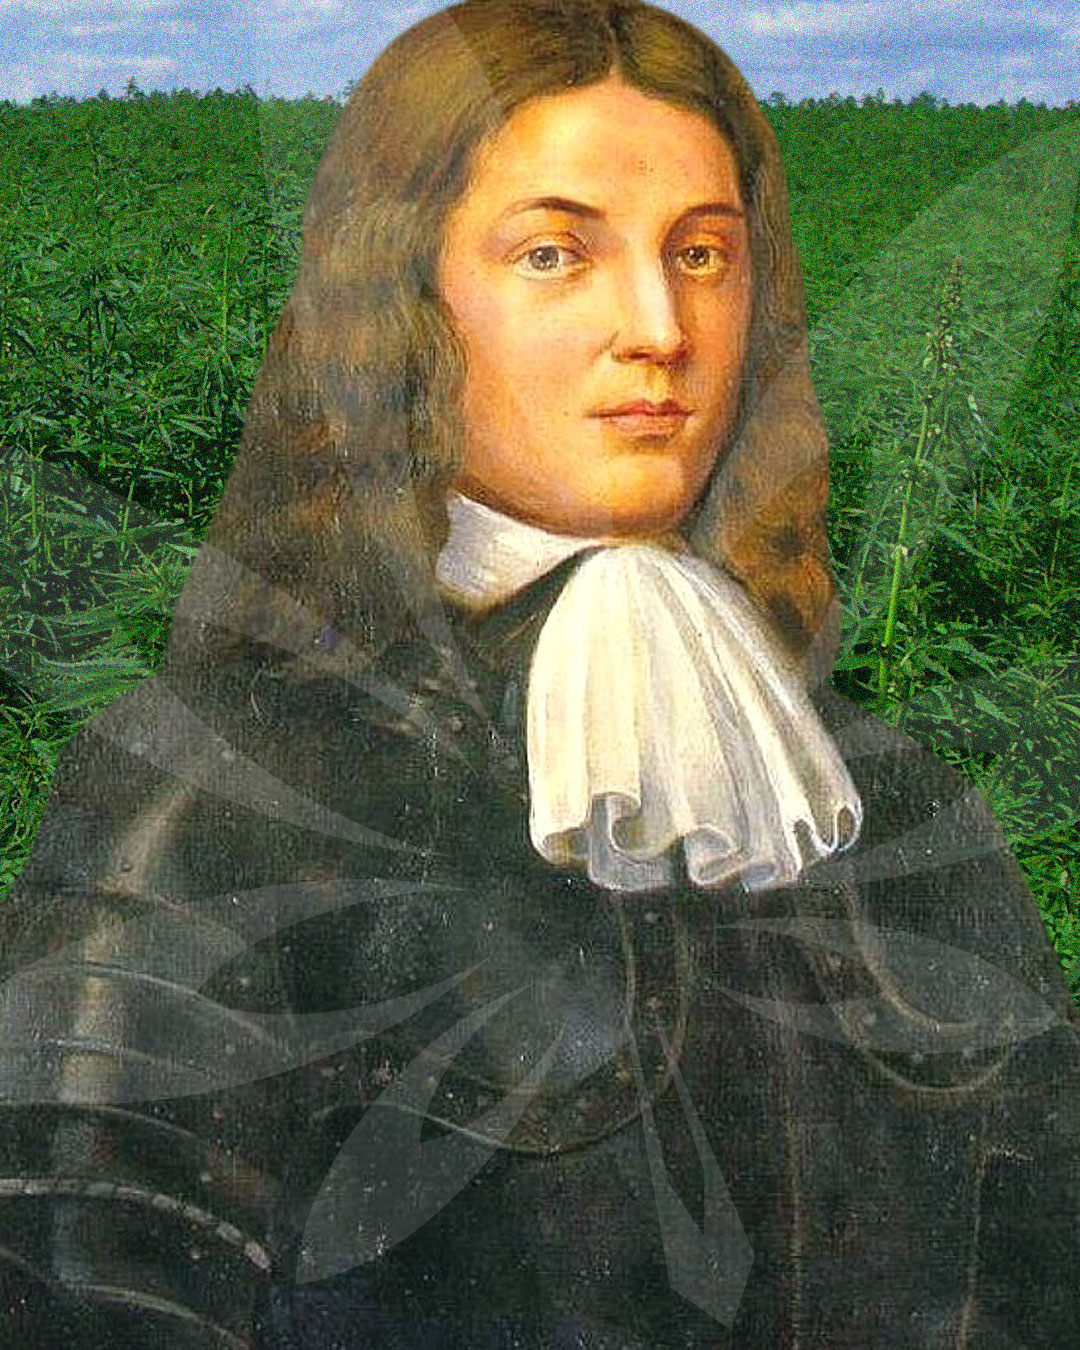 William Penn in front of hemp field composite image